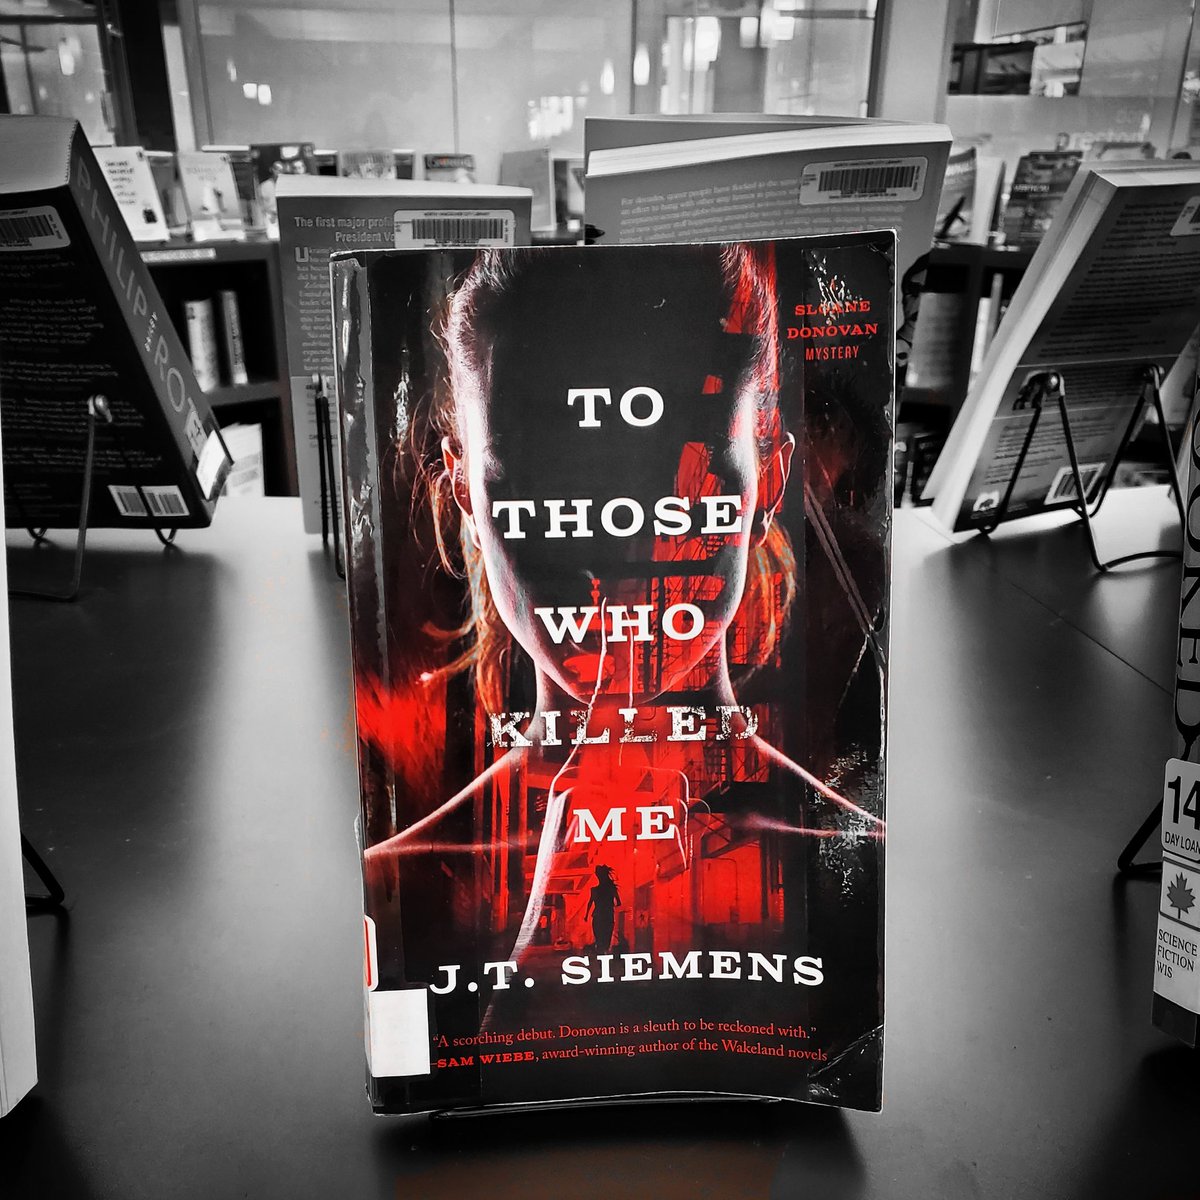 Outstanding and well-thumbed through in the City of North Vancouver Library!
📖
#northvancouver
#WritingCommunity 
#debutnovel
#CrimeFiction 
#localauthors
#VancouverNoir
#ToThoseWhoKilledMe
@JEREMYSIEMENS 
@NeWestPress 
@NorthVanCityLib